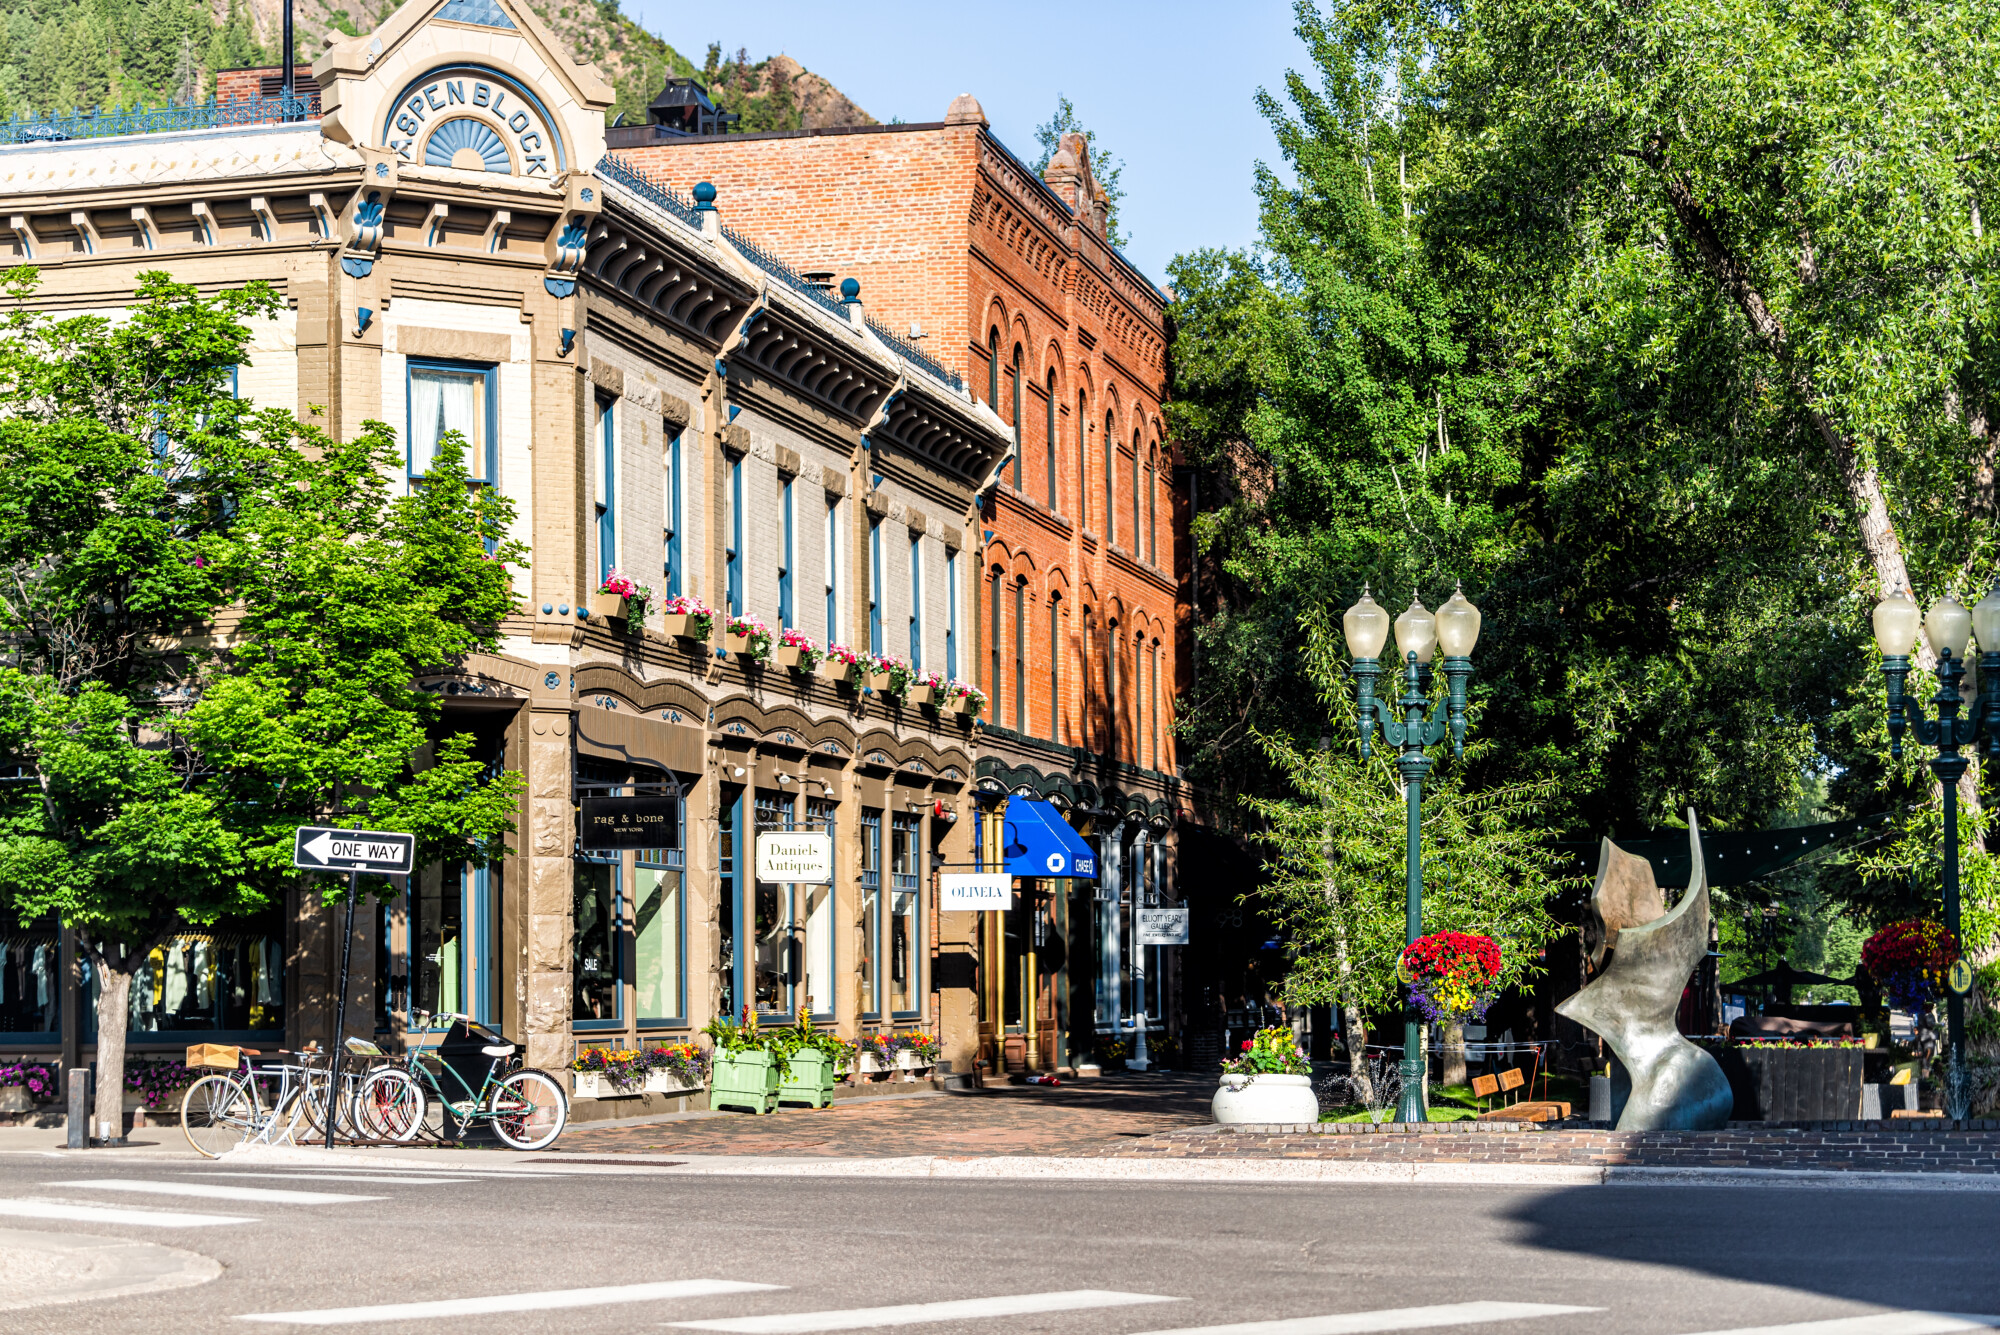 Aspen, USA - June 27, 2019: Town in Colorado with vintage archit